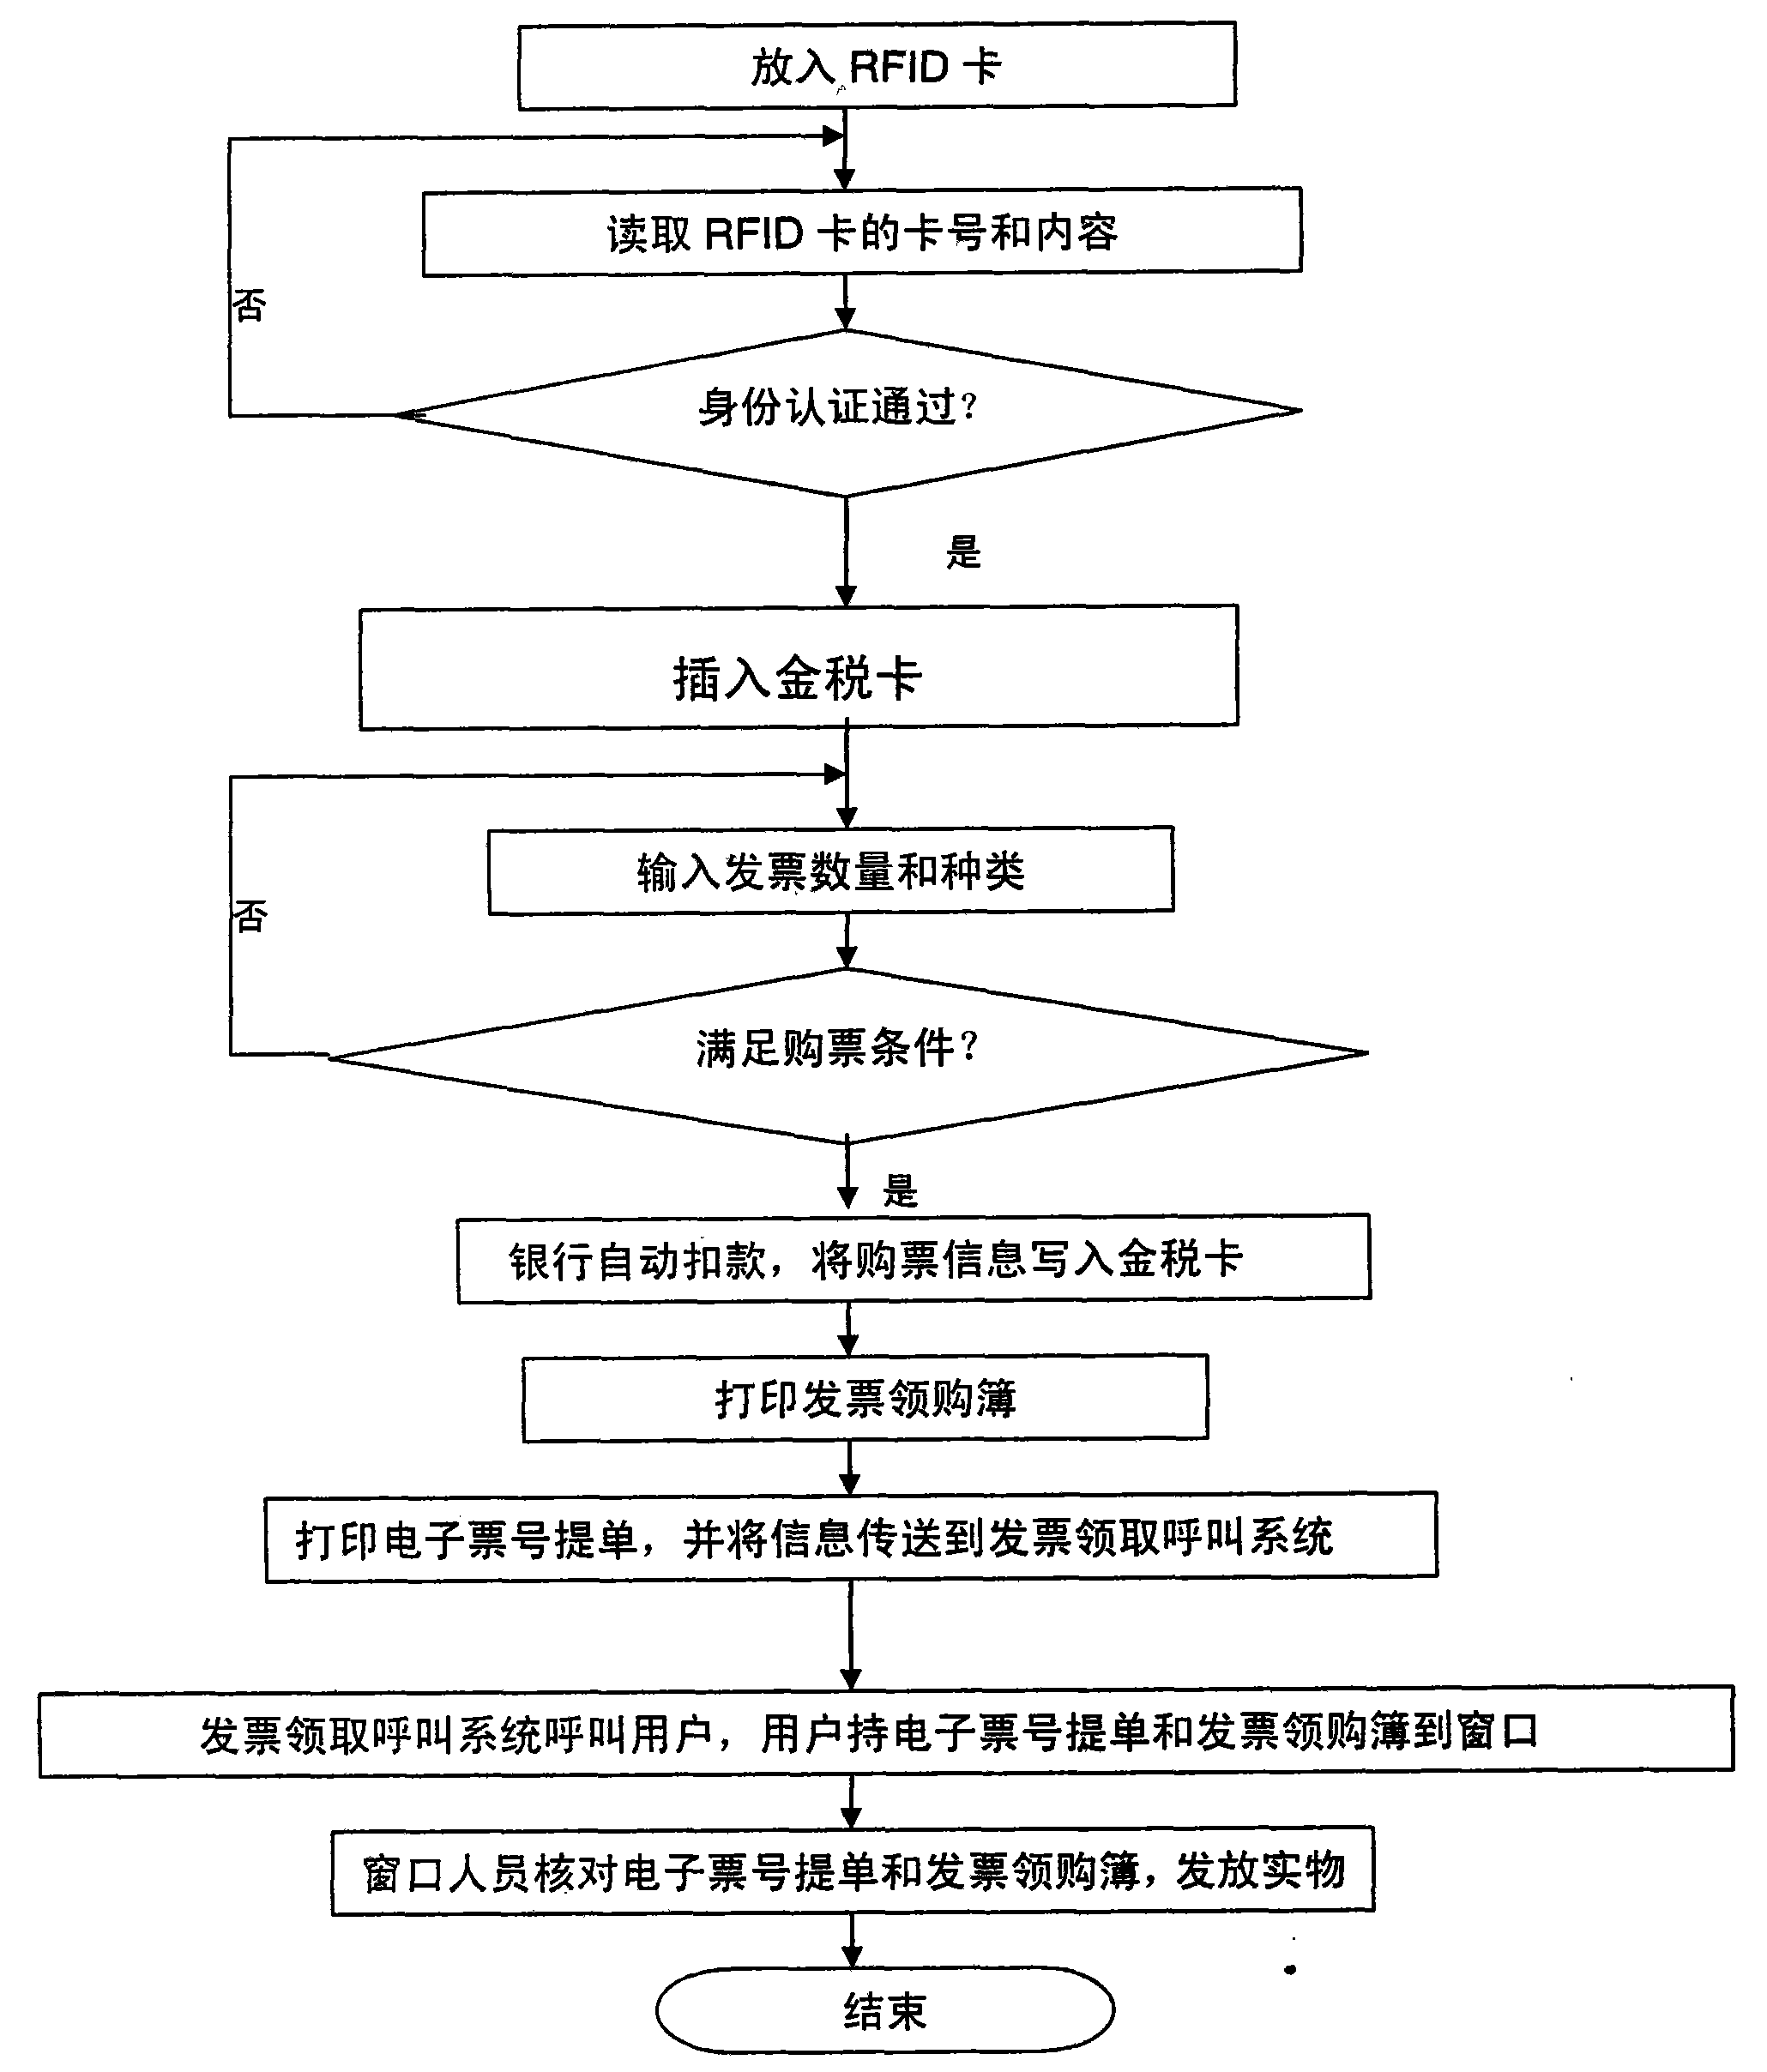 Self-service invoice selling method with separate invoice number selling process and invoice drawing process